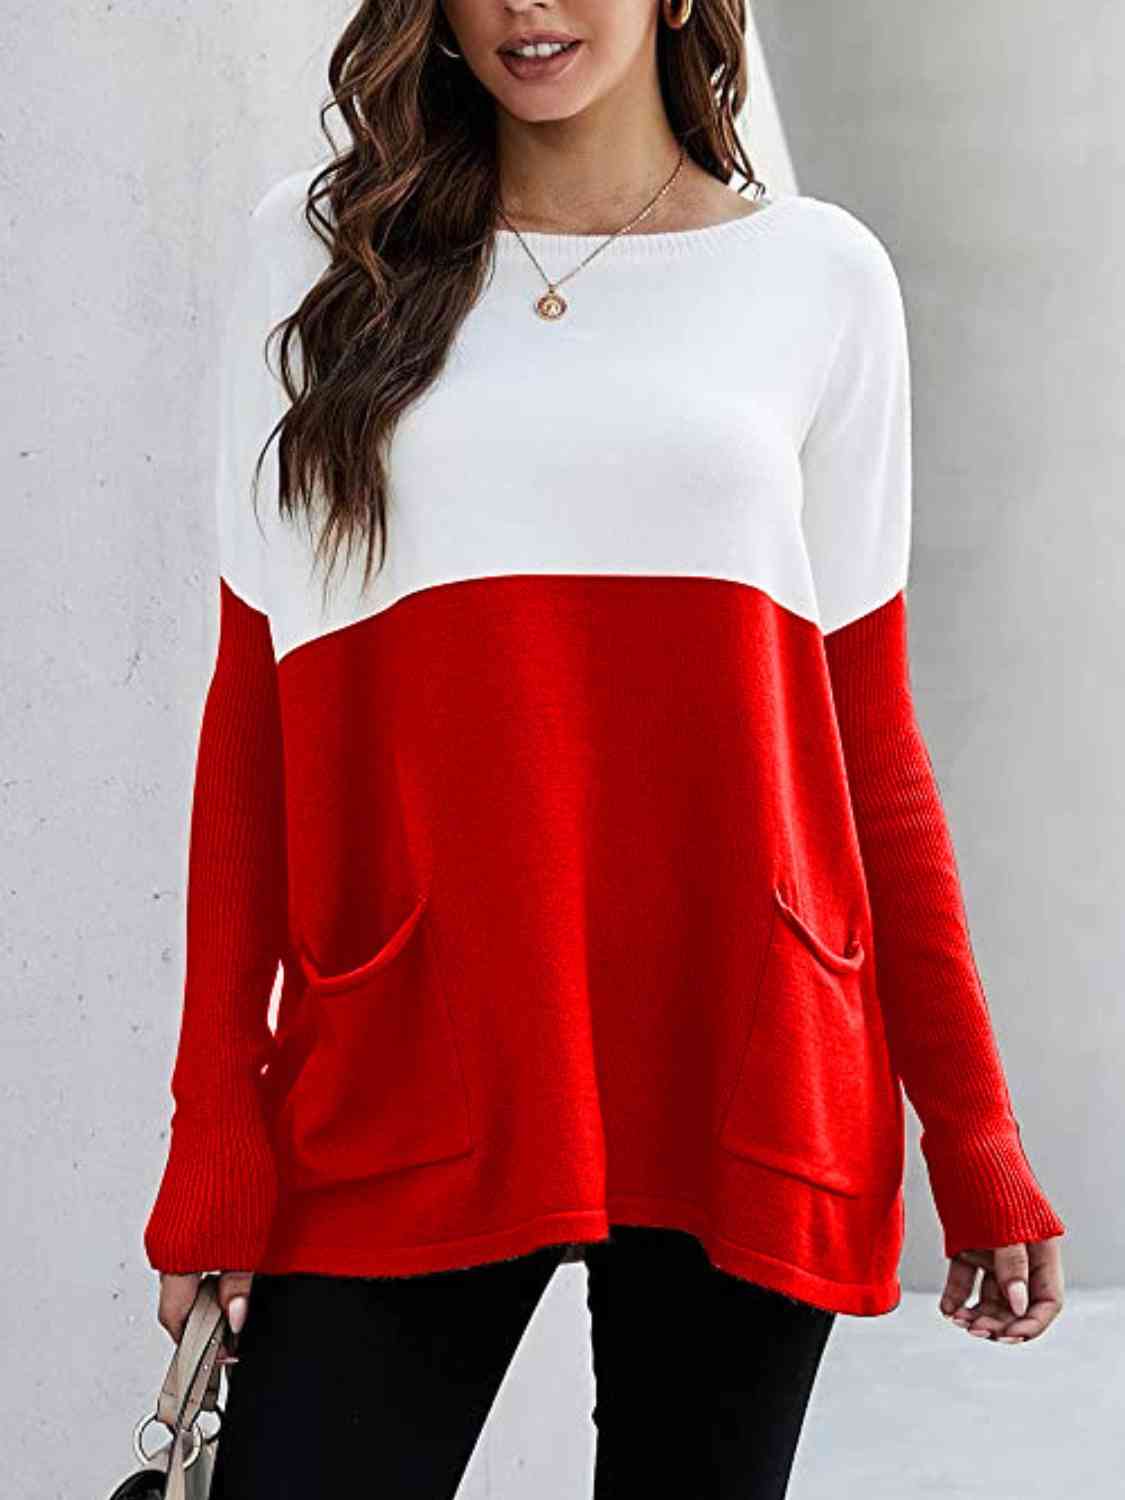 Two Tone Pullover Sweater with Pockets (7 Colors)  Krazy Heart Designs Boutique   